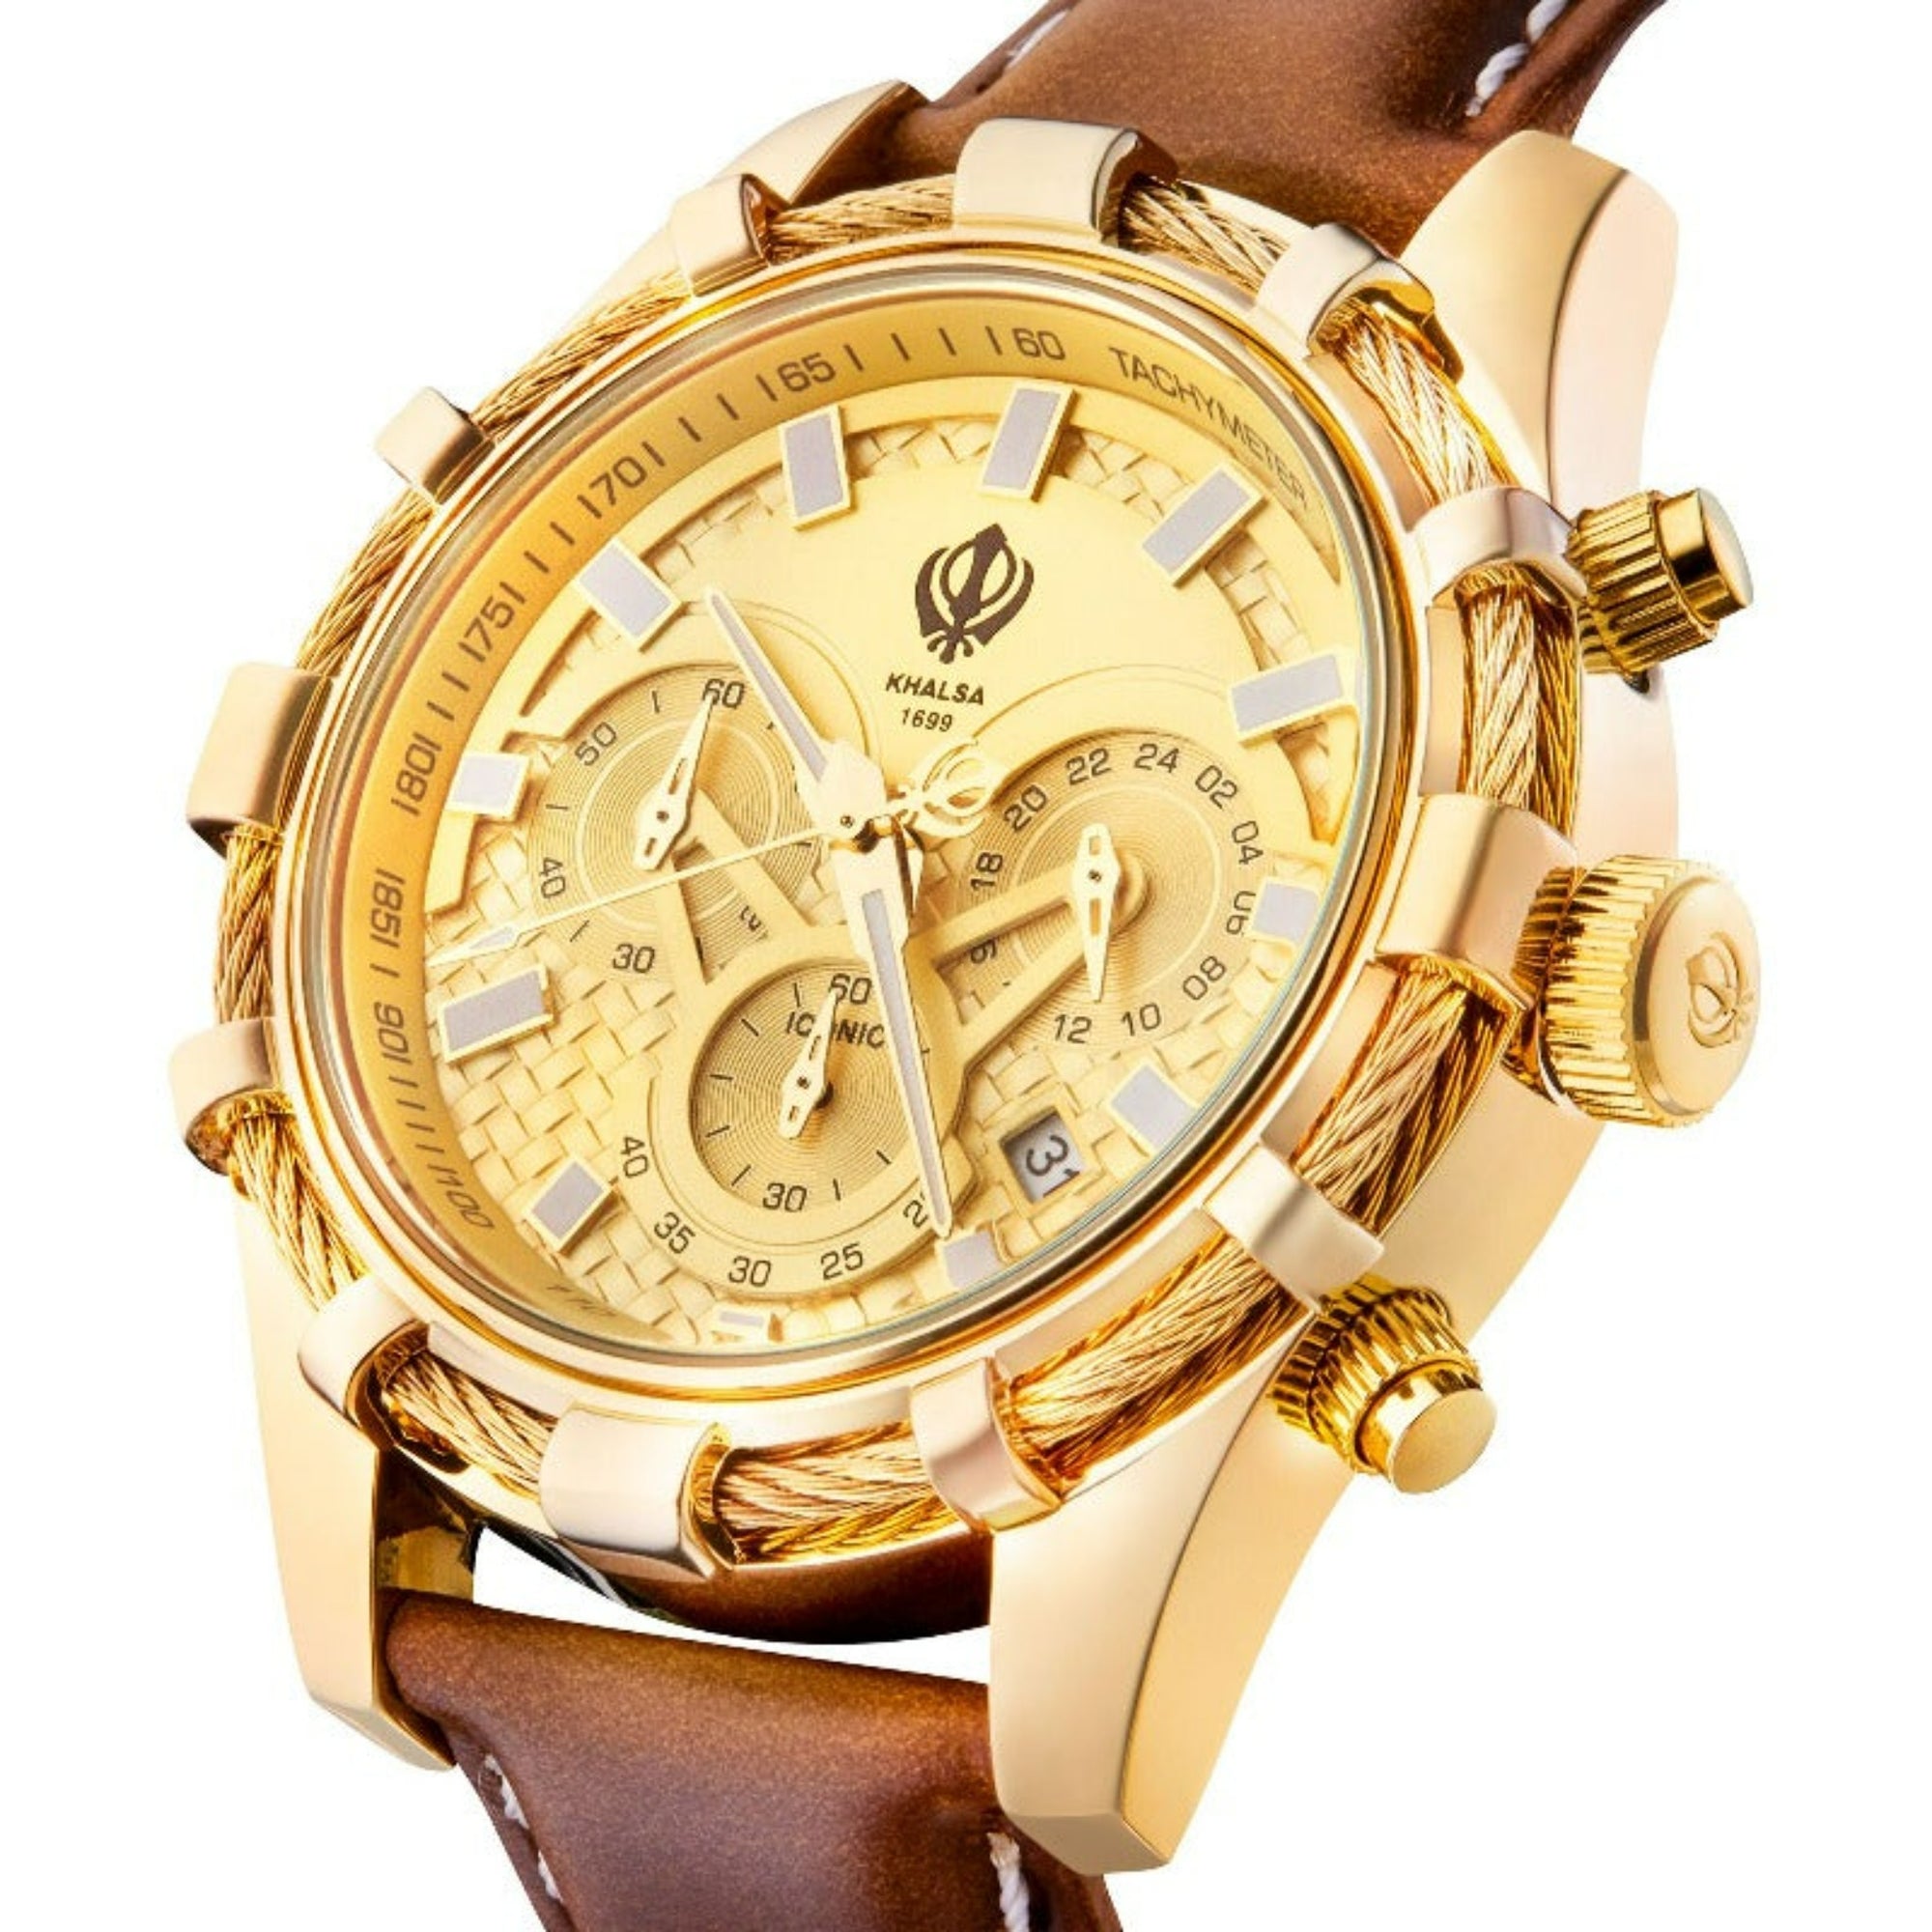 Iconic Luxury Men's Sikh Watch with Khanda Symbol Gold Rope and Brown Leather Strap - Timeless Style